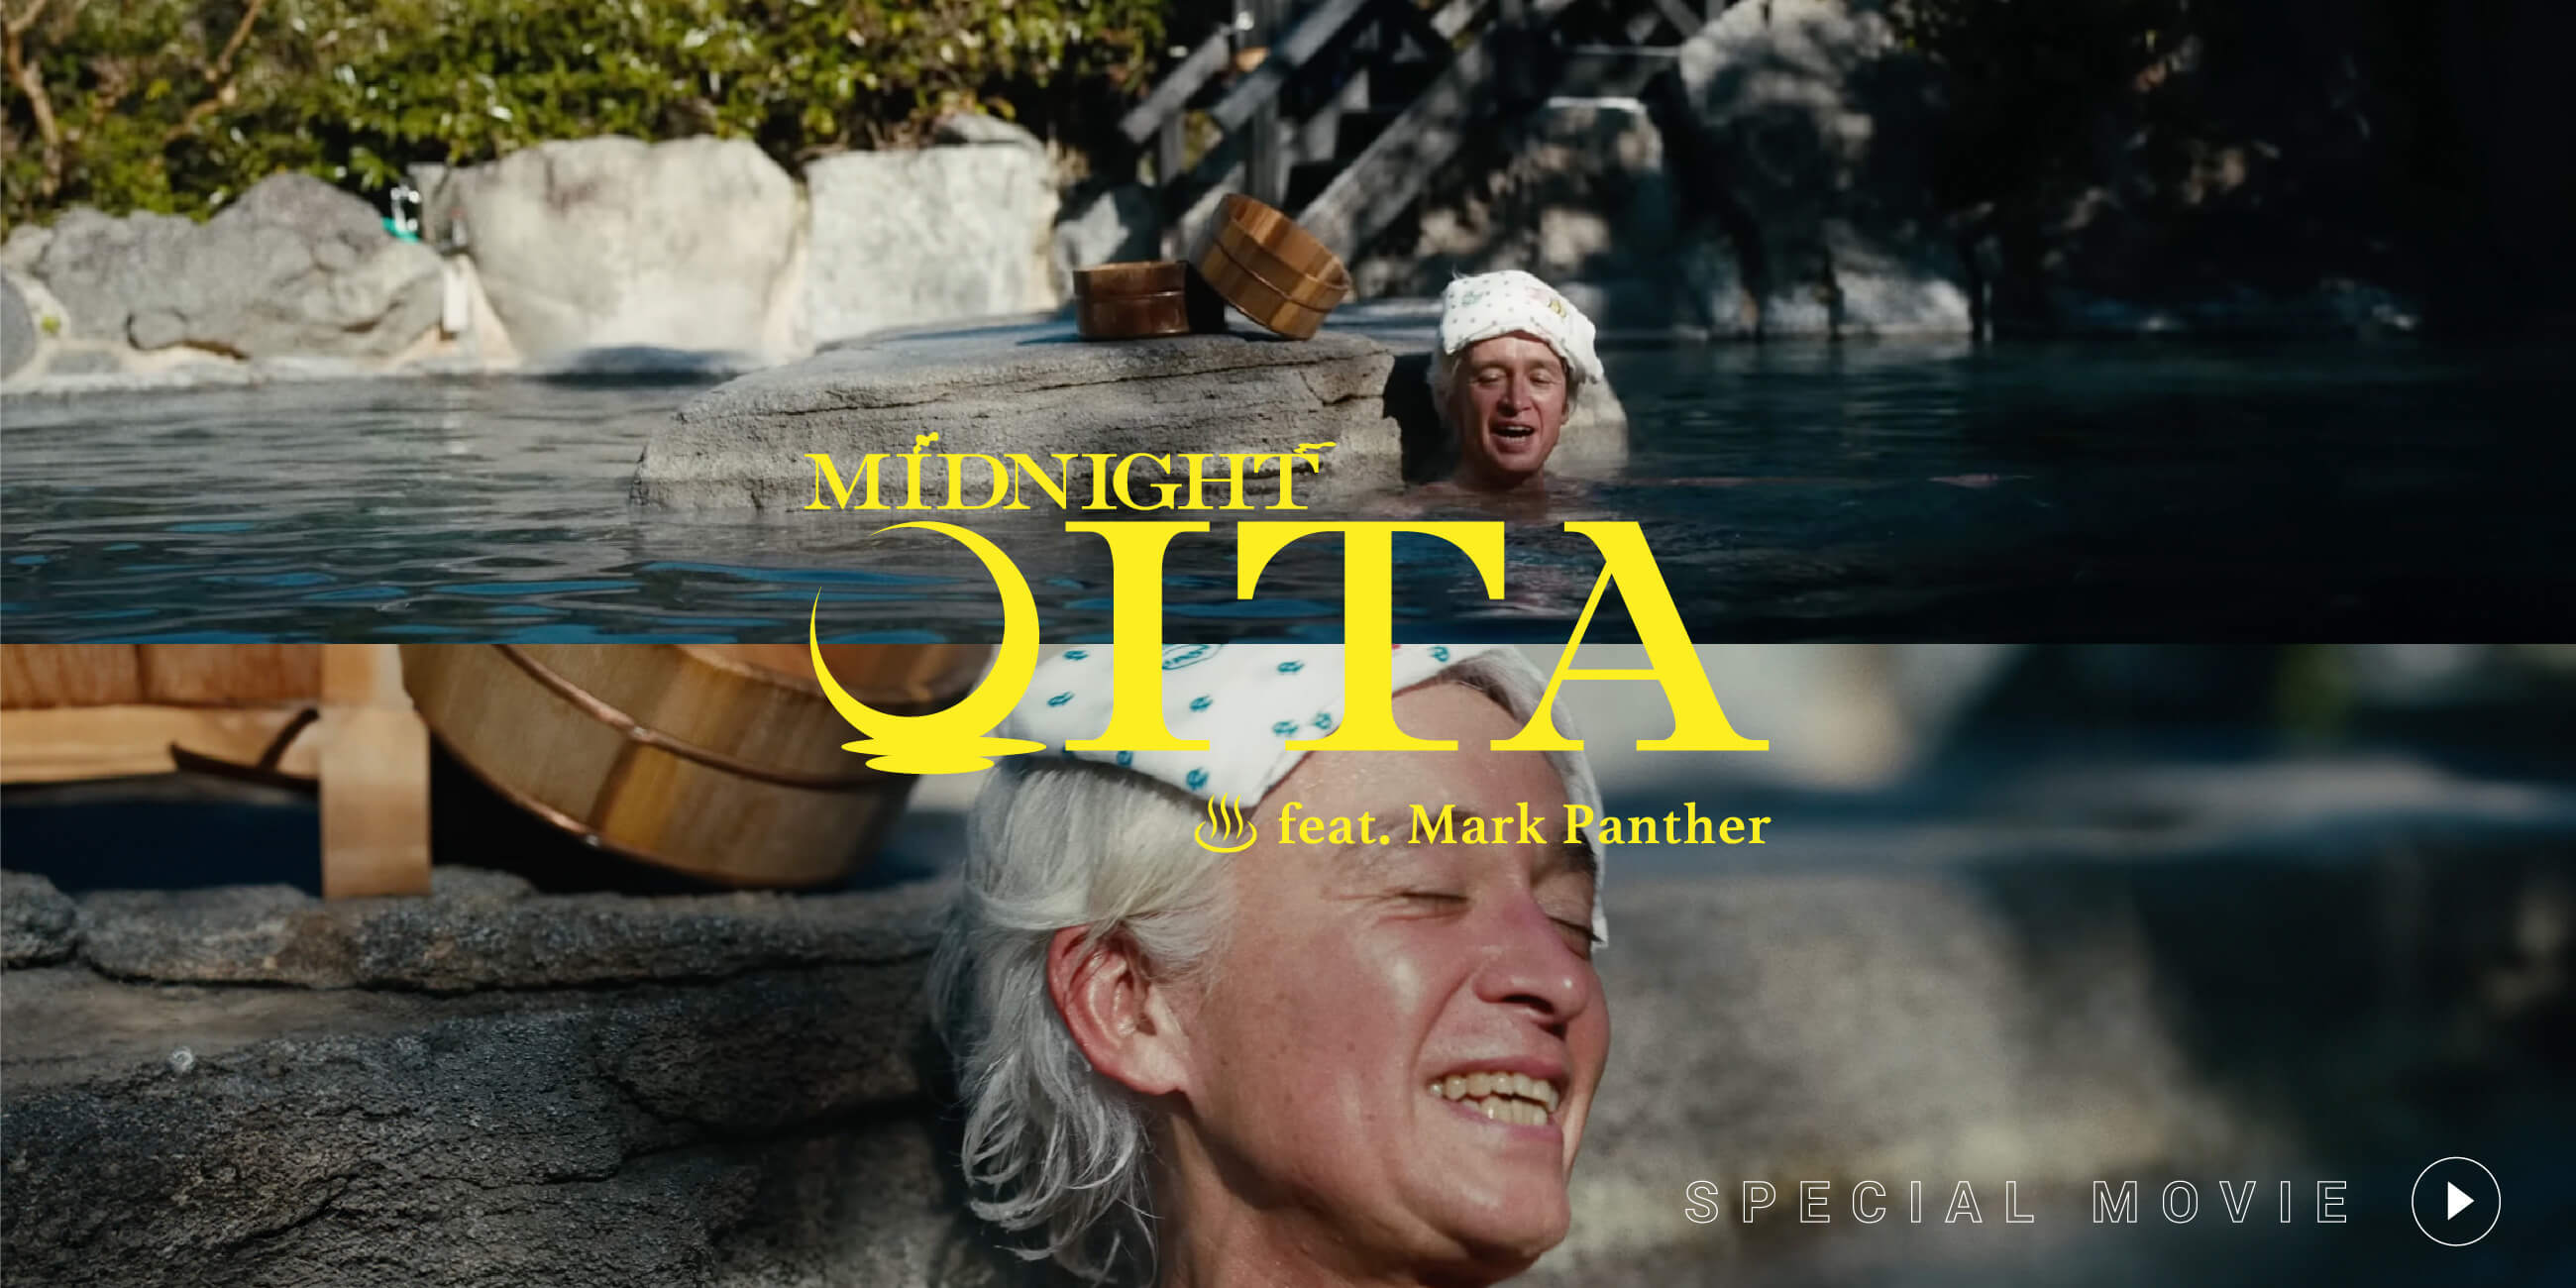 MIDNIGHT OITA feat. Mark Panther SPECIAL MOVIE